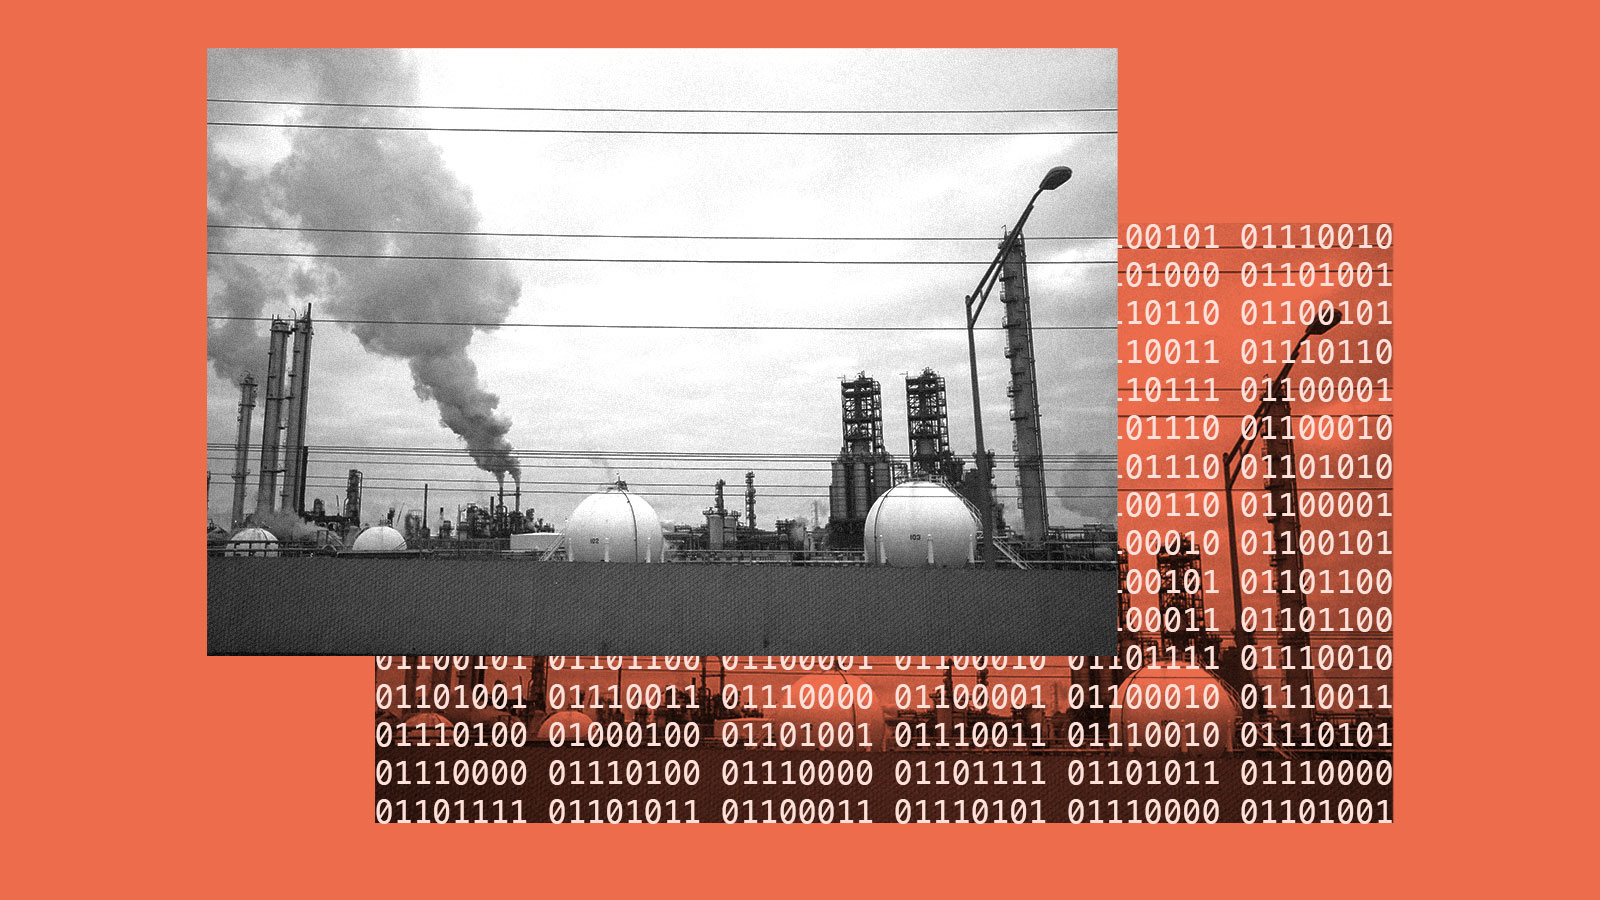 red background with black and white photo of oil refinery, with binary text under photo